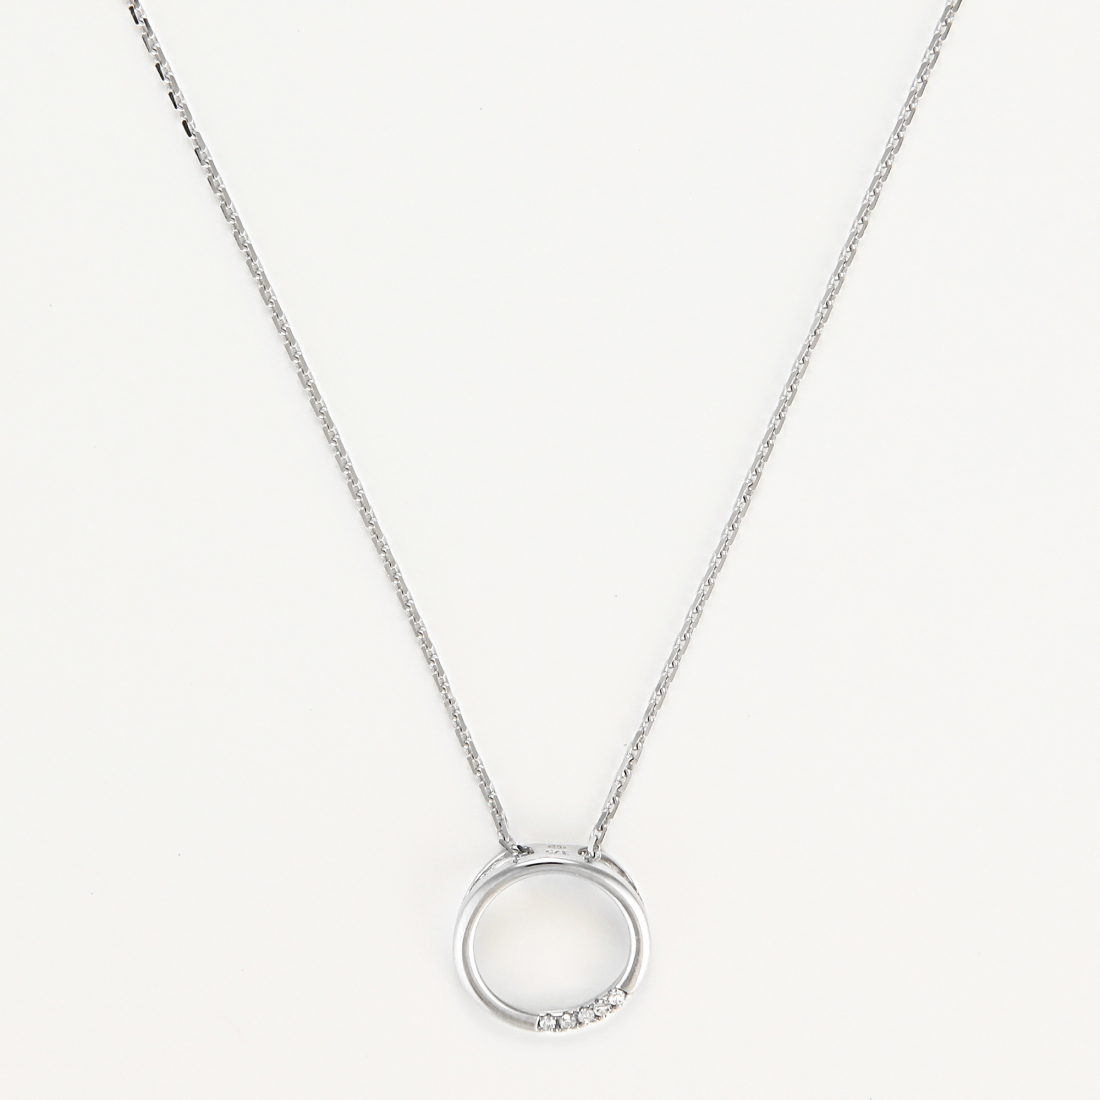 Women's 'Cercle' Pendant with chain